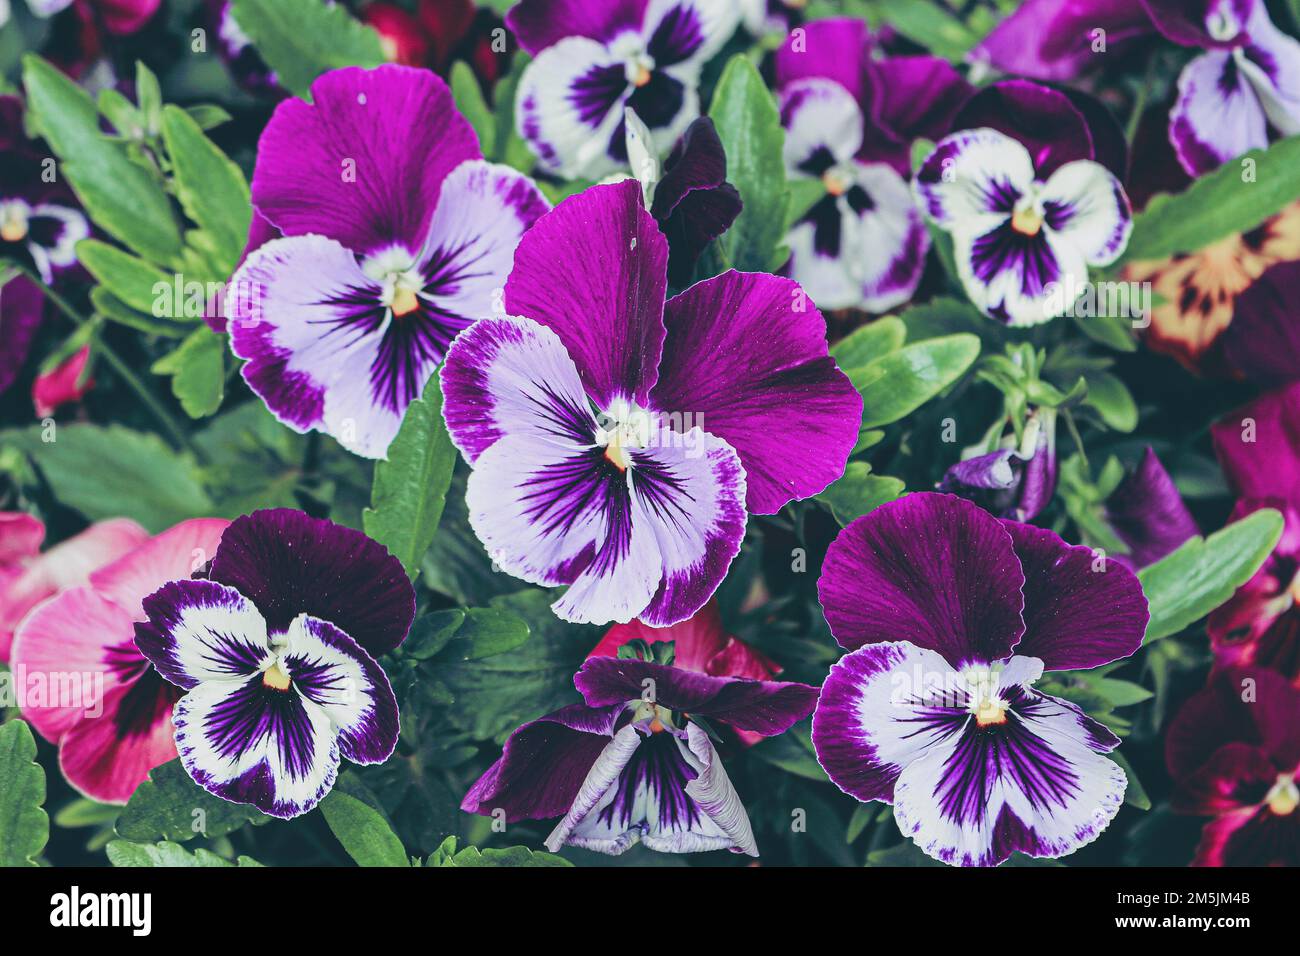 Colorful pansies in bloom. Photographed at the arboretum. Stock Photo